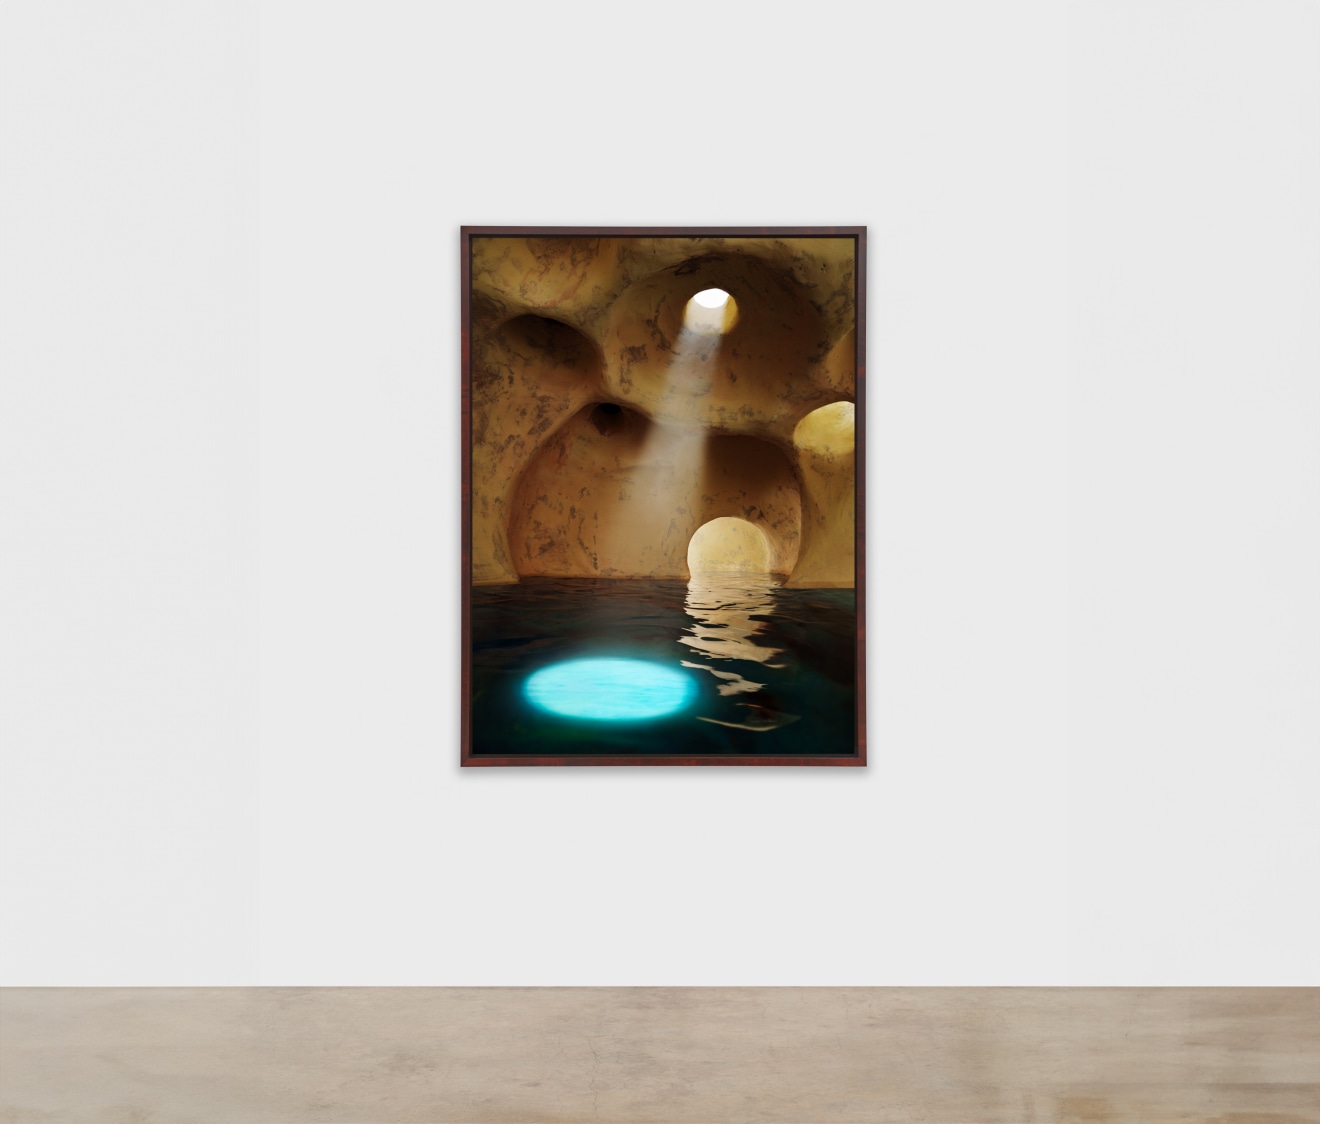 James Casebere,&nbsp;Cavern with Skylights V, 2024, framed archival pigment print mounted to Dibond, paper: 63 3/8 x 46 3/4 inches, framed: 66 3/16 x 49 9/16 x 2 1/4 inches&nbsp;&copy; James&nbsp;Casebere Courtesy: the artist and Sean Kelly, New York/Los Angeles